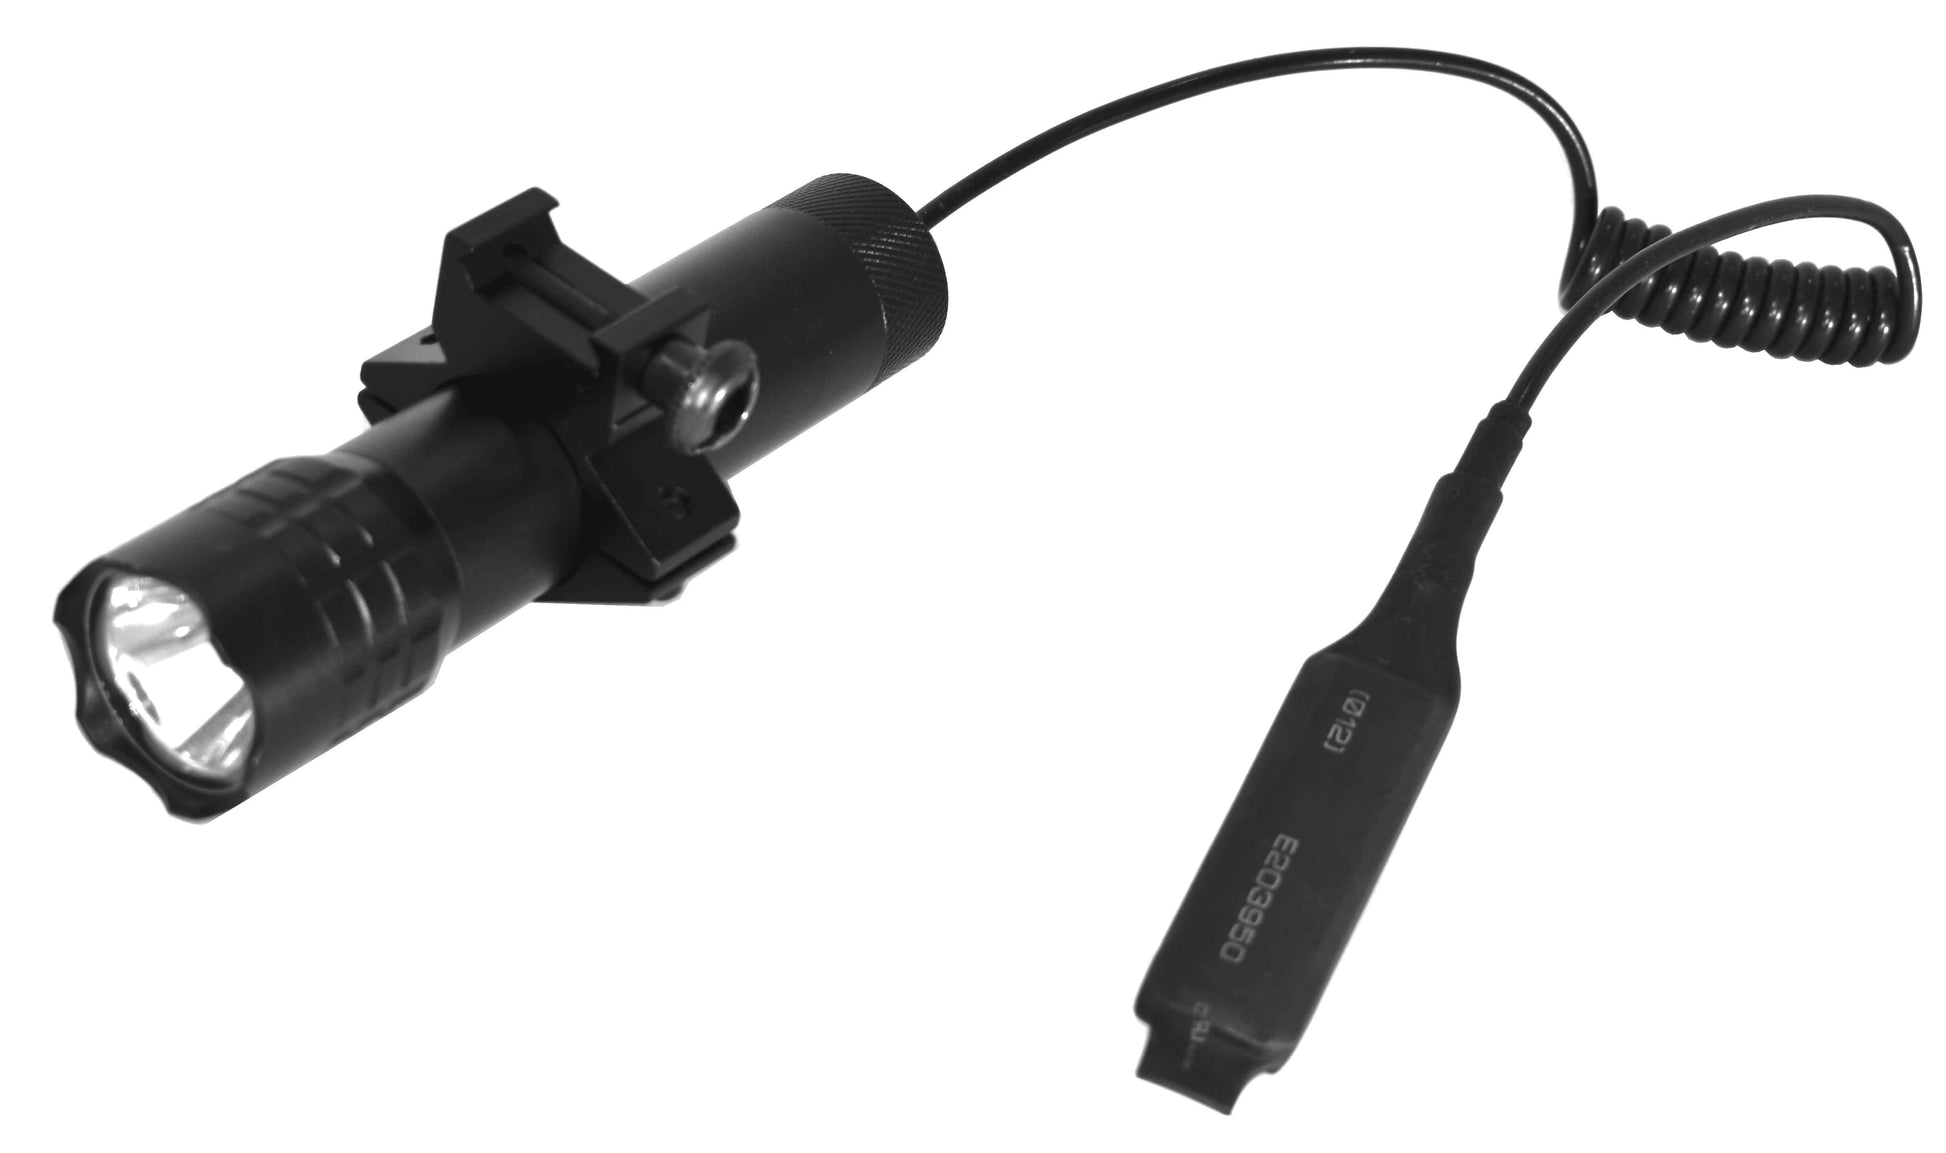 tactical flashlight with rear cap switch for rifles and shotguns.